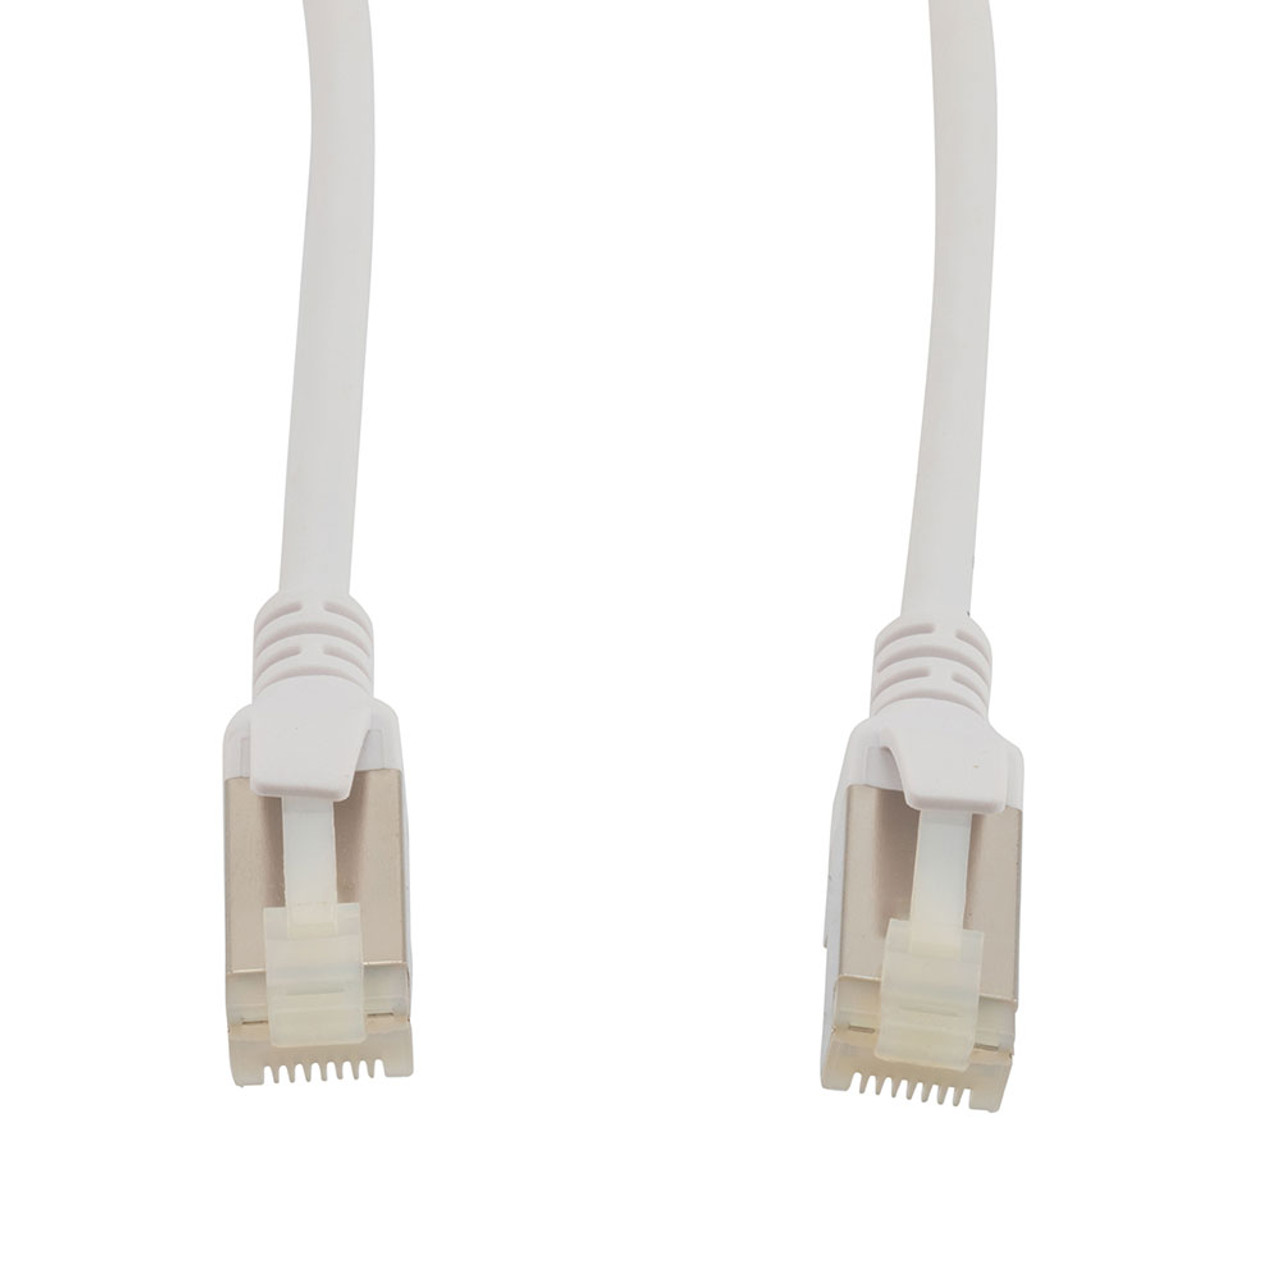 Category 6a 10 Gbps Slim Ethernet Antibacterial Antimicrobial Cable Assembly, RJ45 Male/Plug, S/FTP, 30 AWG, PVC Antibacterial, White, 25 FT